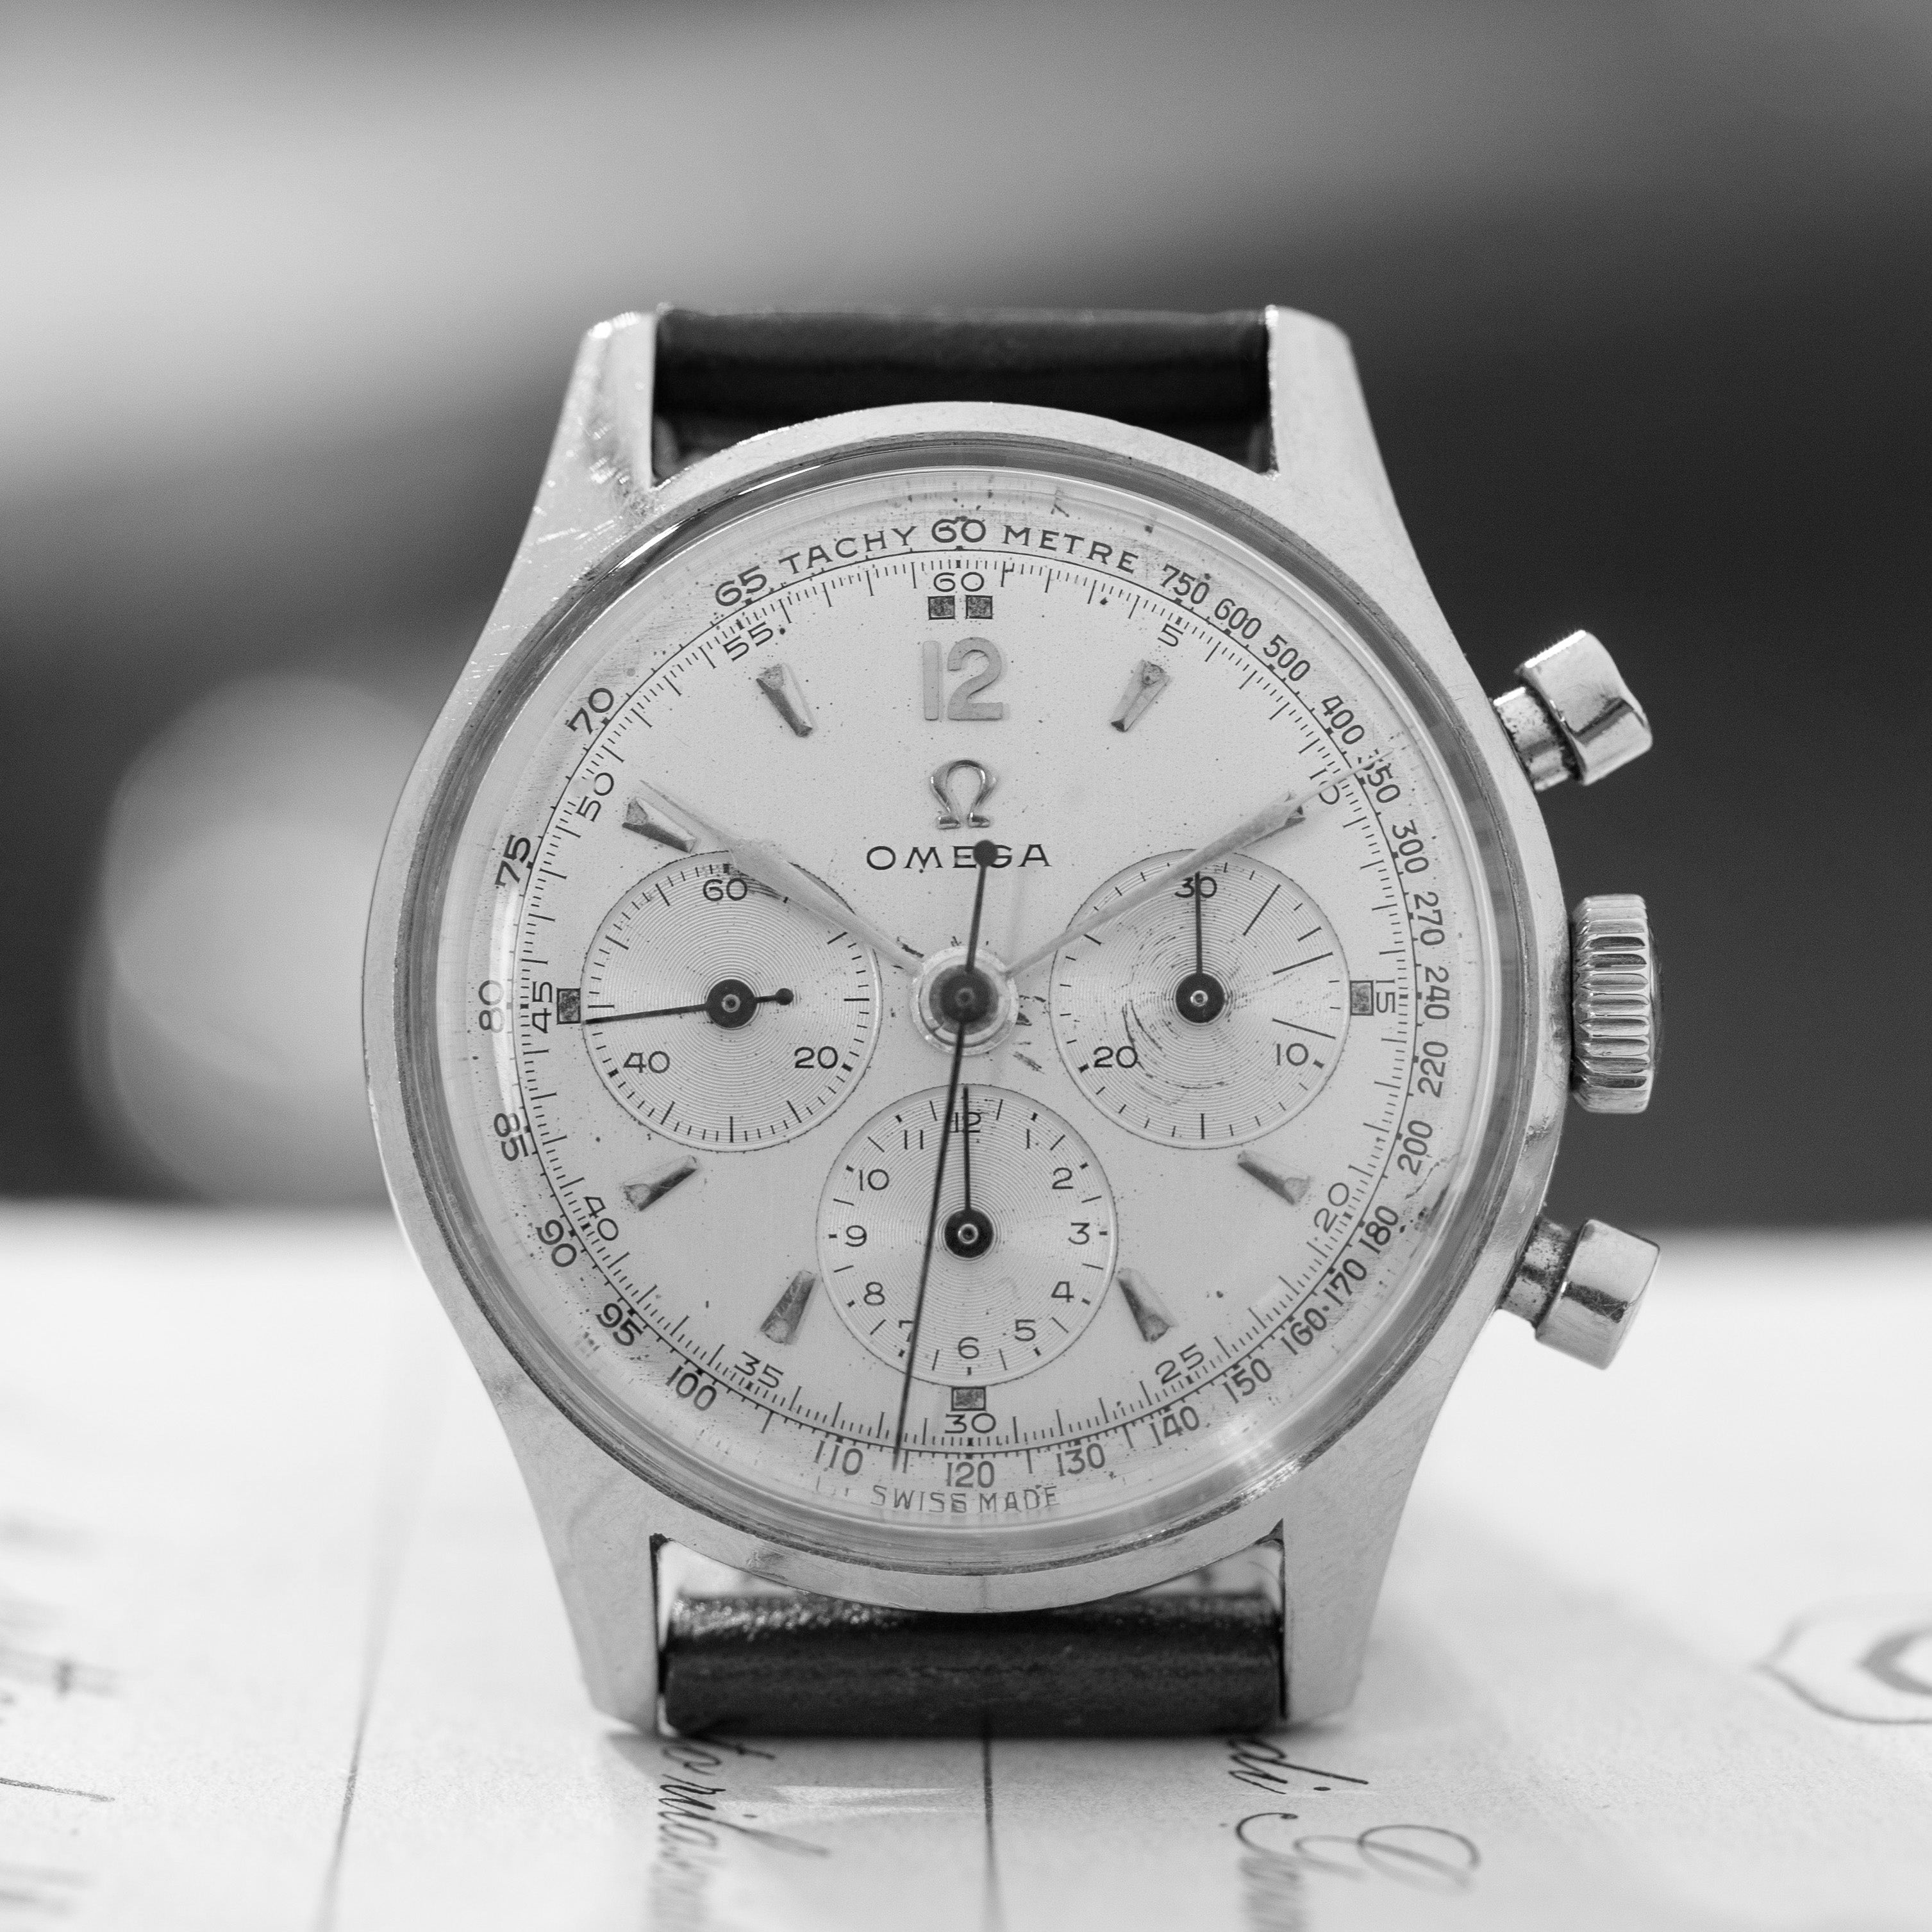 Omega military chronograph retailed for Argentinian Air Forces